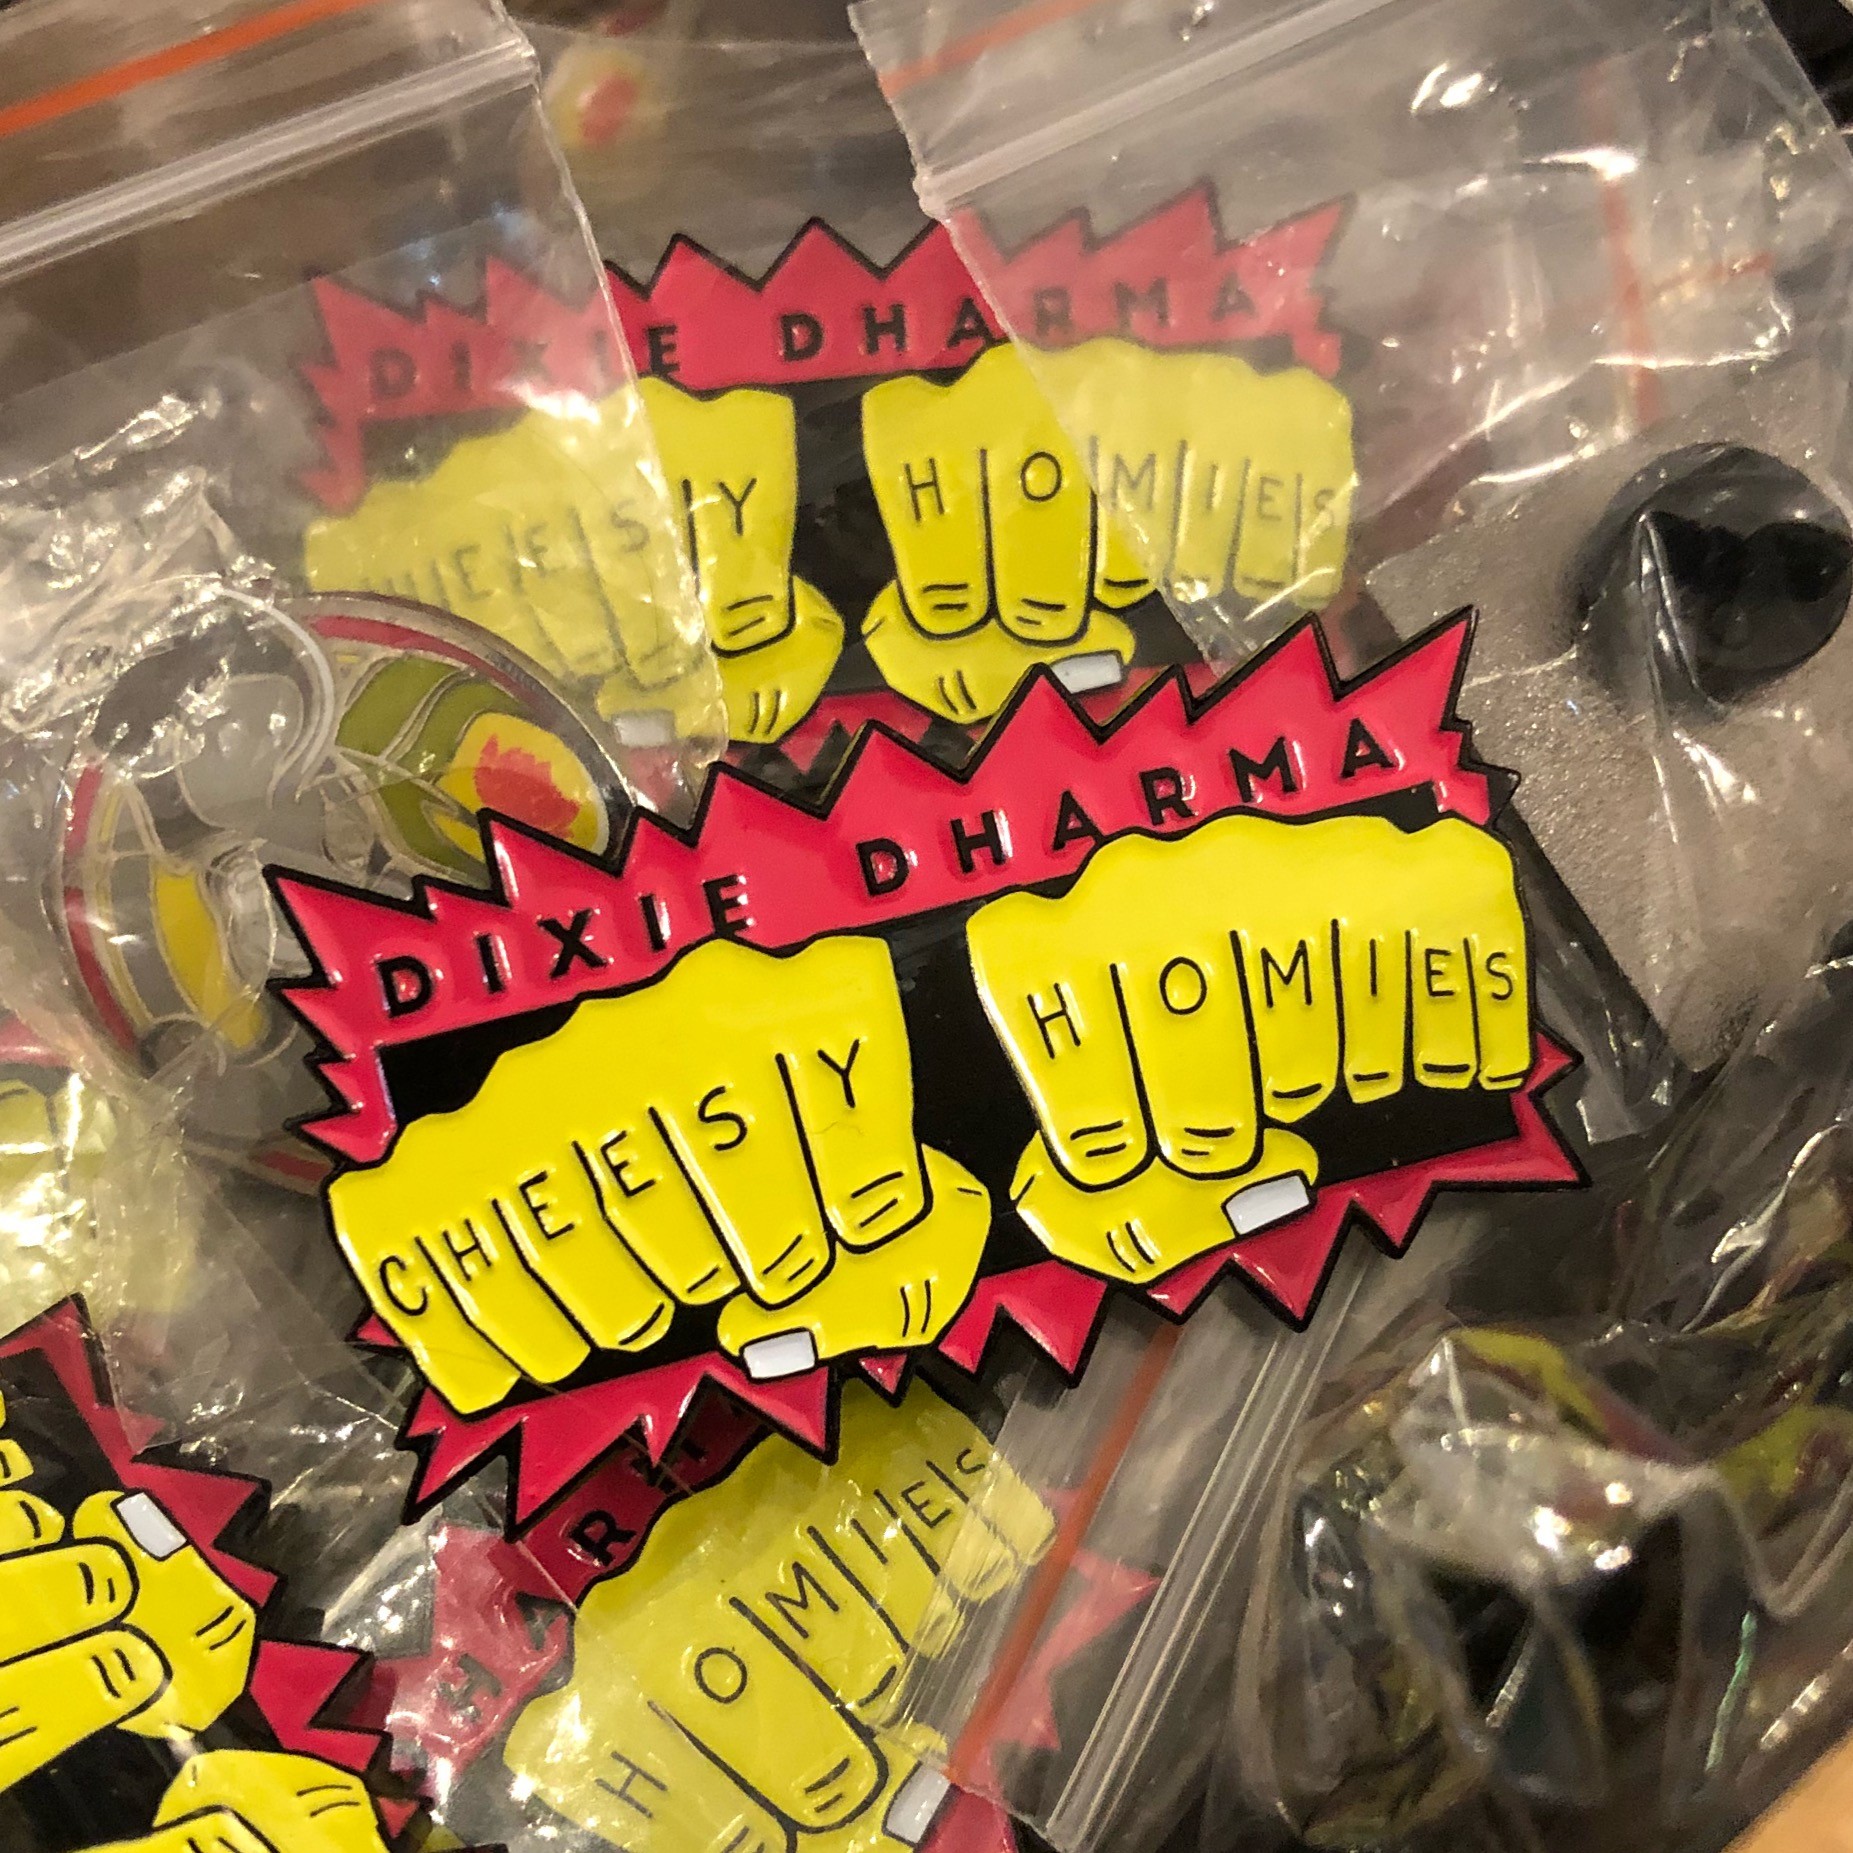 Dixie Dharma "Cheesy Homies Knuckle Tat" enamel pin - PHOTO BY JESSICA BRYCE YOUNG